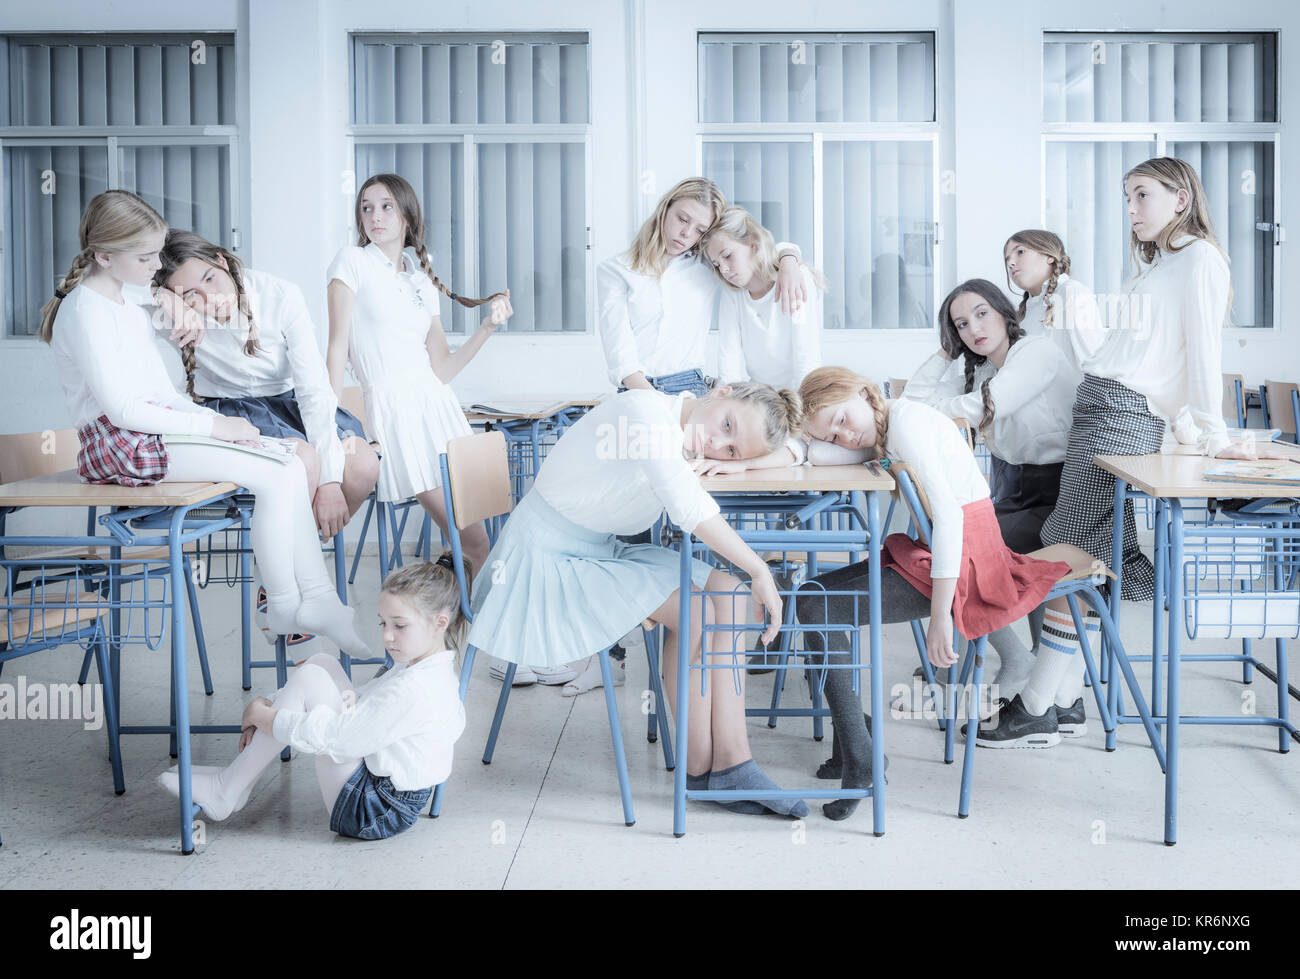 Bored students waiting for the class to finish. Stock Photo